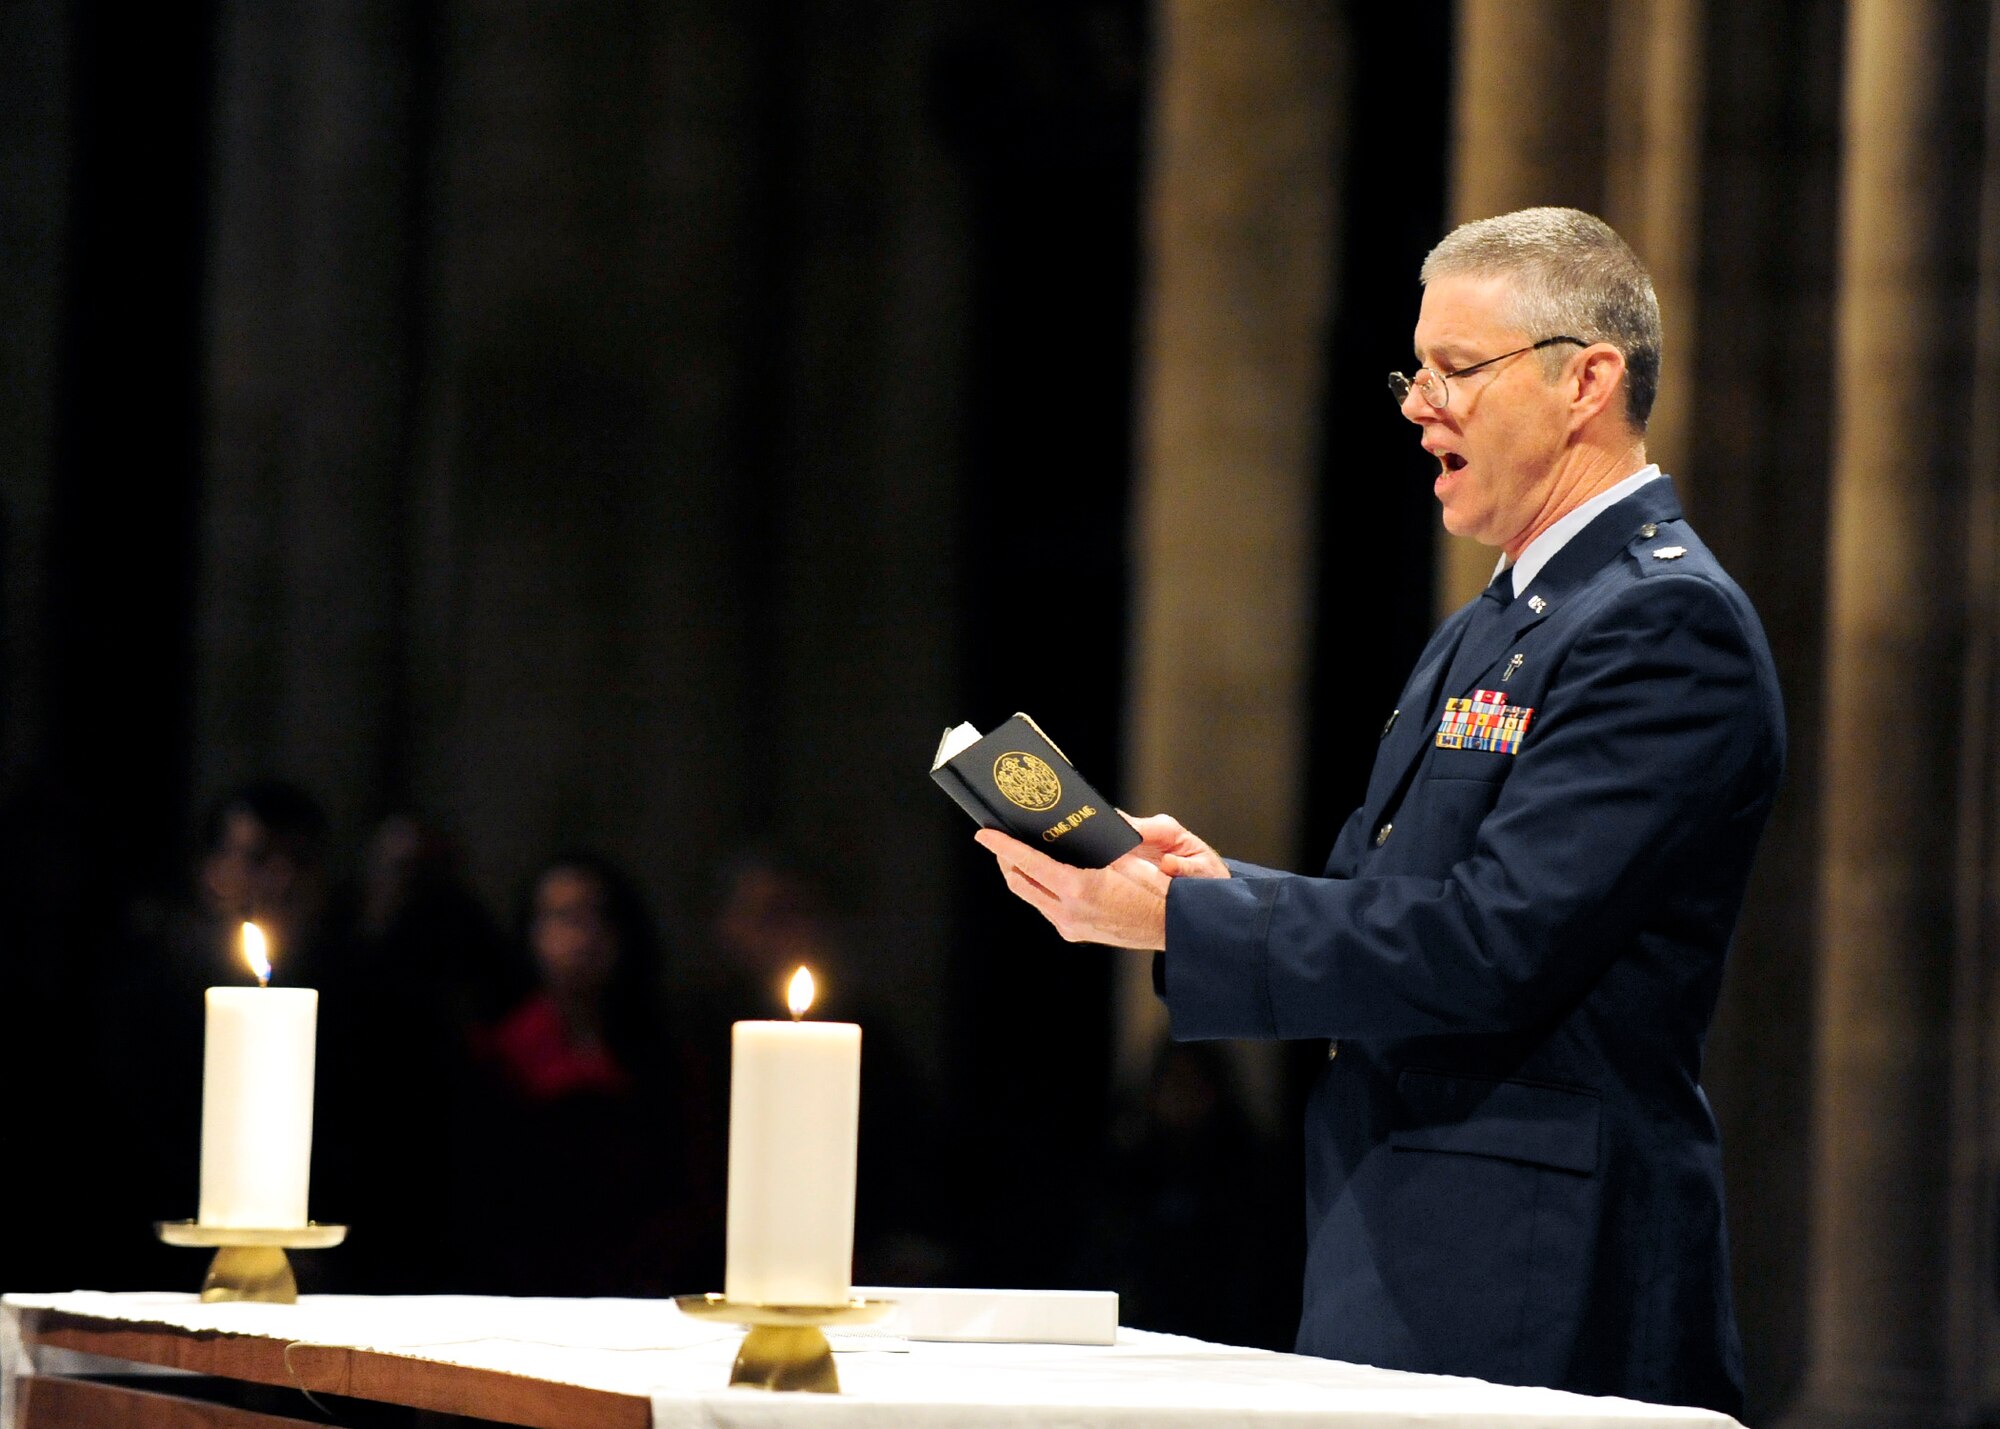 RAF MILDENHALL, England – Chaplain (Lt. Col.) Henry Close, 100th Air Refueling Wing chaplain, gives the final blessing during the Thanksgiving service at Ely Cathedral Nov. 23, 2011. The cathedral was built by William the Conqueror as a prominent outpost after the bloody and lengthy rebellion by Hereward the Wake. (U.S. Air Force photo/Senior Airman Ethan Morgan)